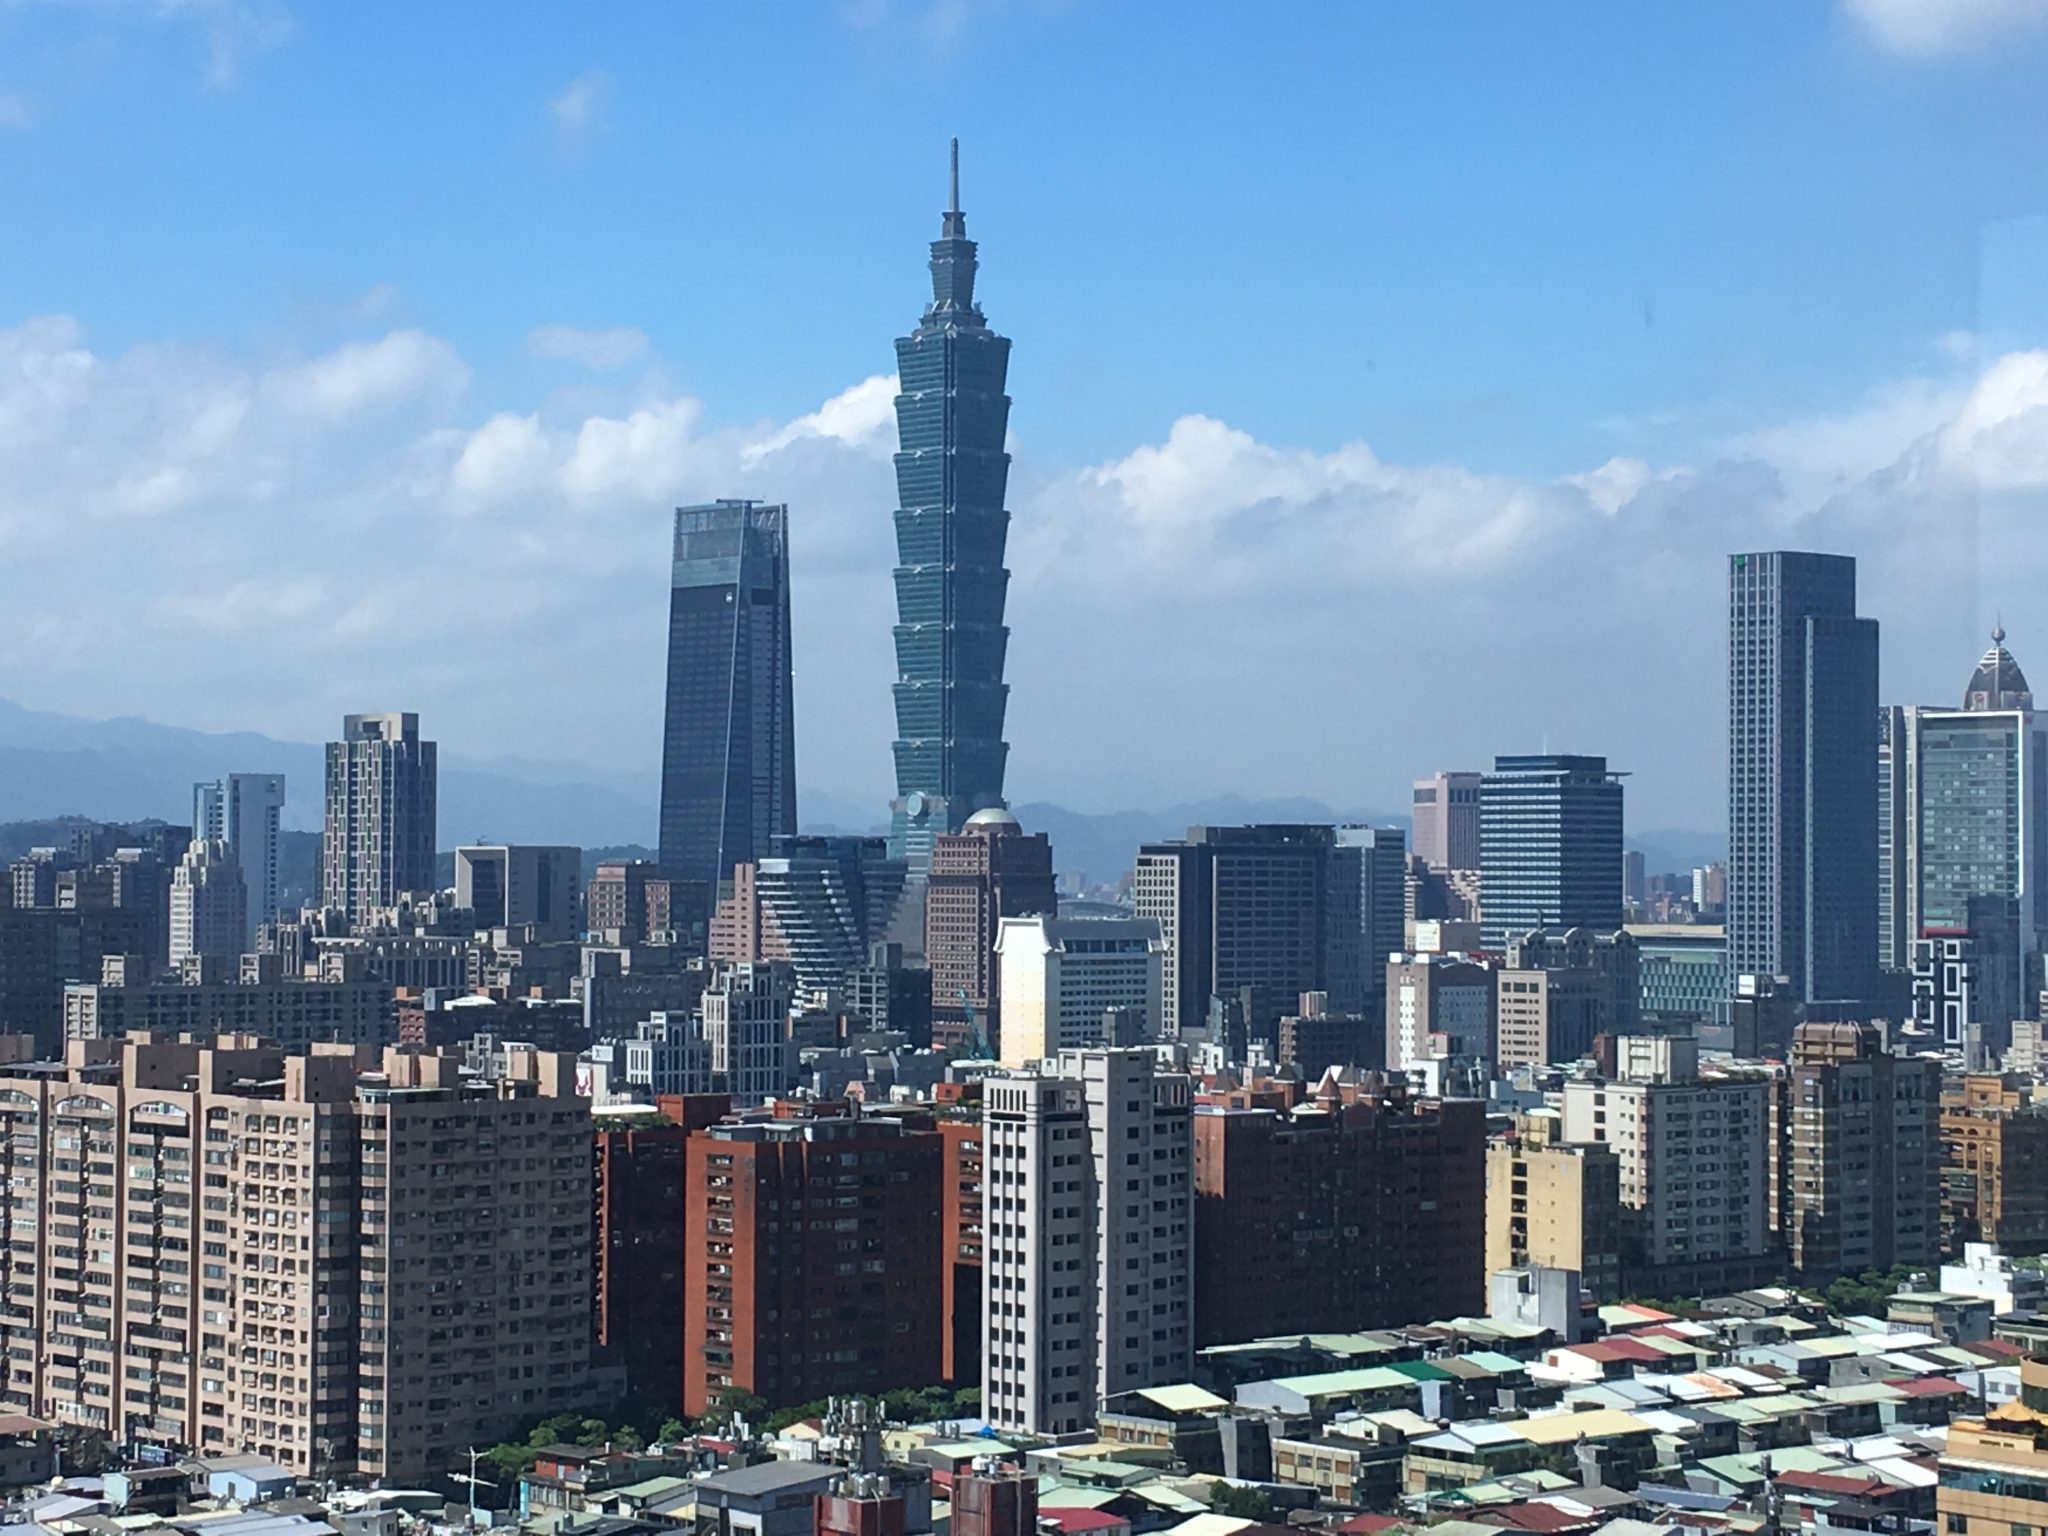 Amba Taipei Songshan: Hotel with Magnificent View of Taipei 101